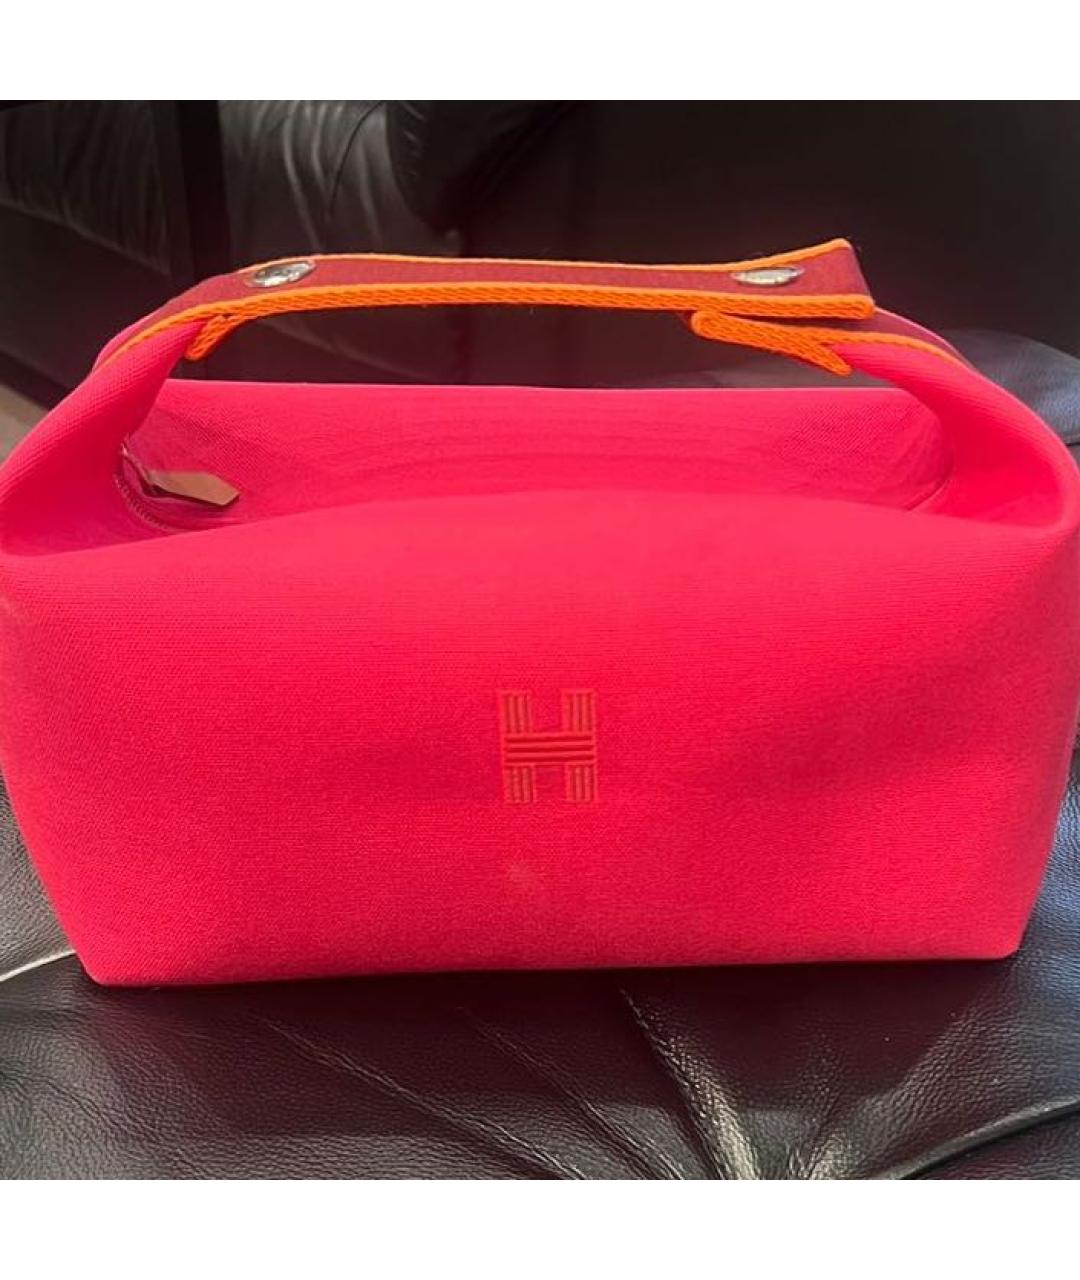 HERMES PRE-OWNED Фуксия хлопковая косметичка, фото 2